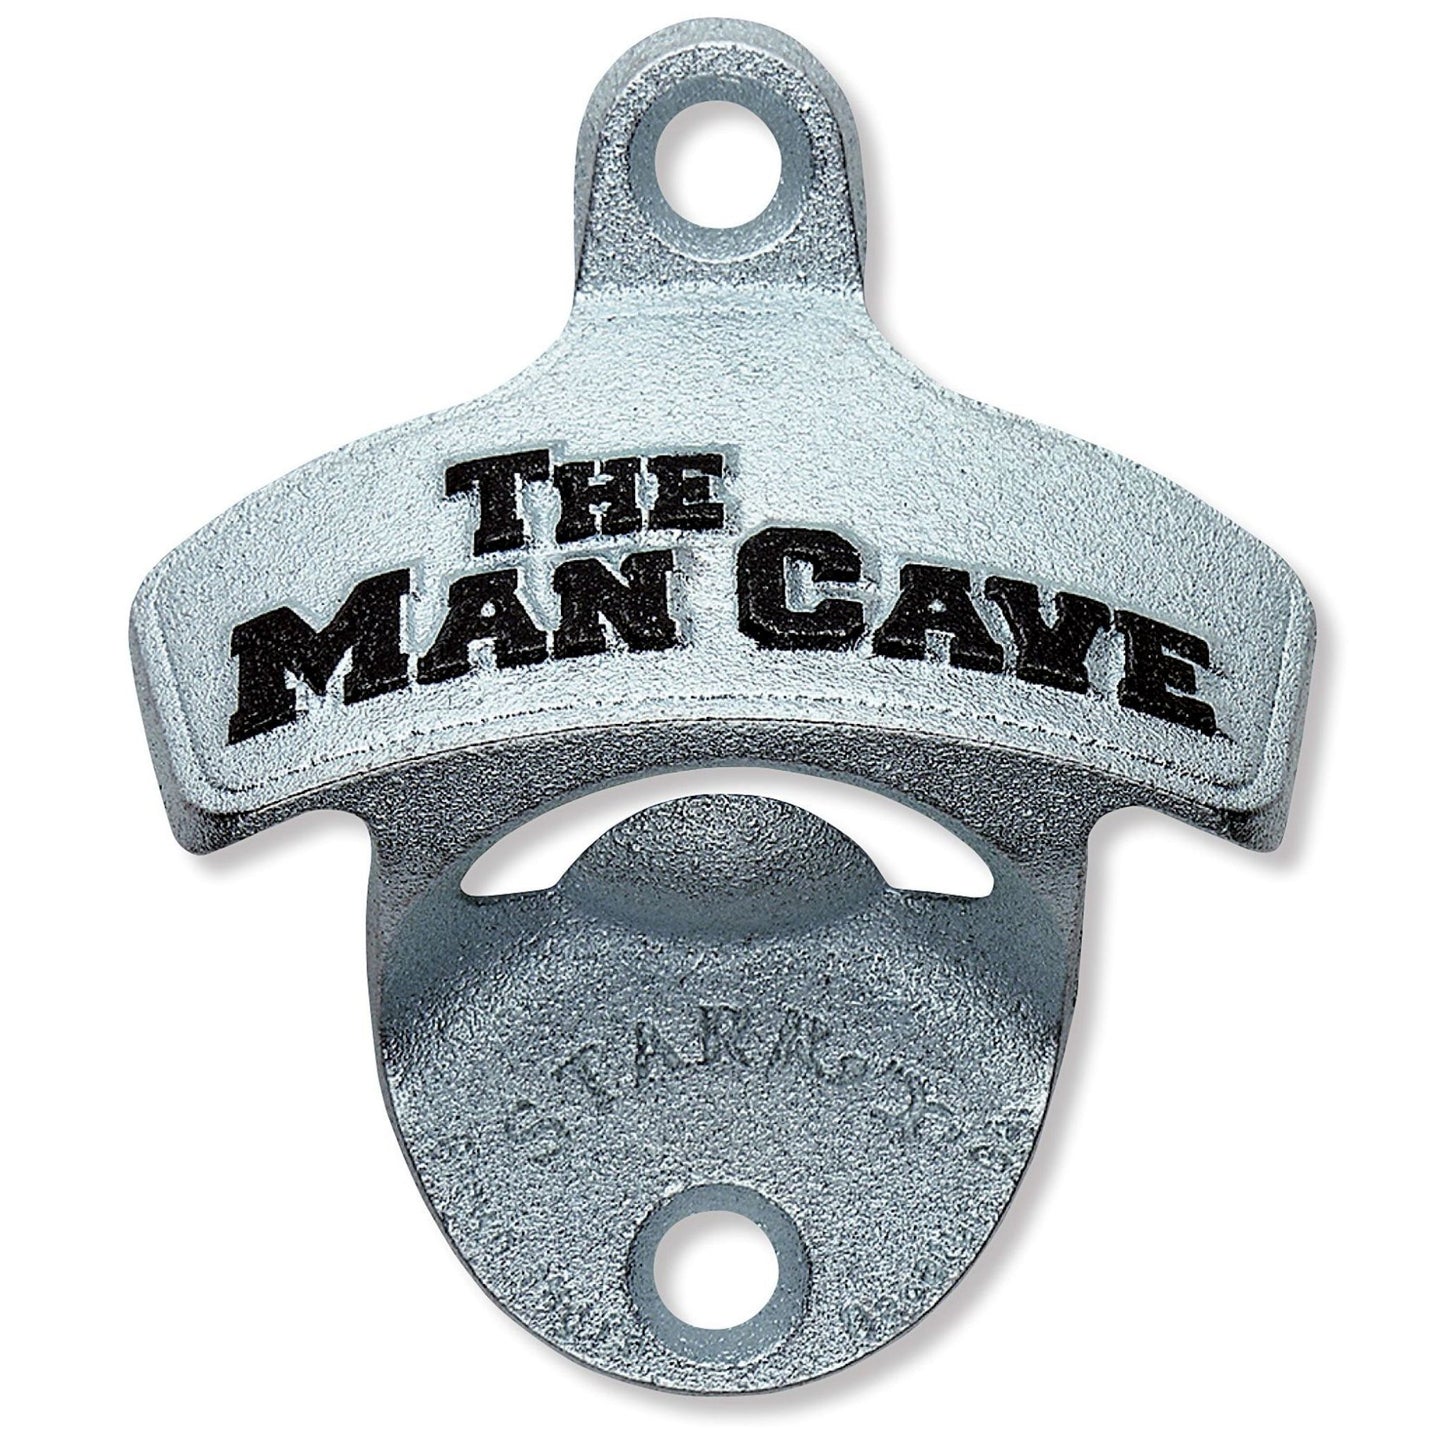 The Man Cave Cast Iron Series Wall Mounted Bottle Opener